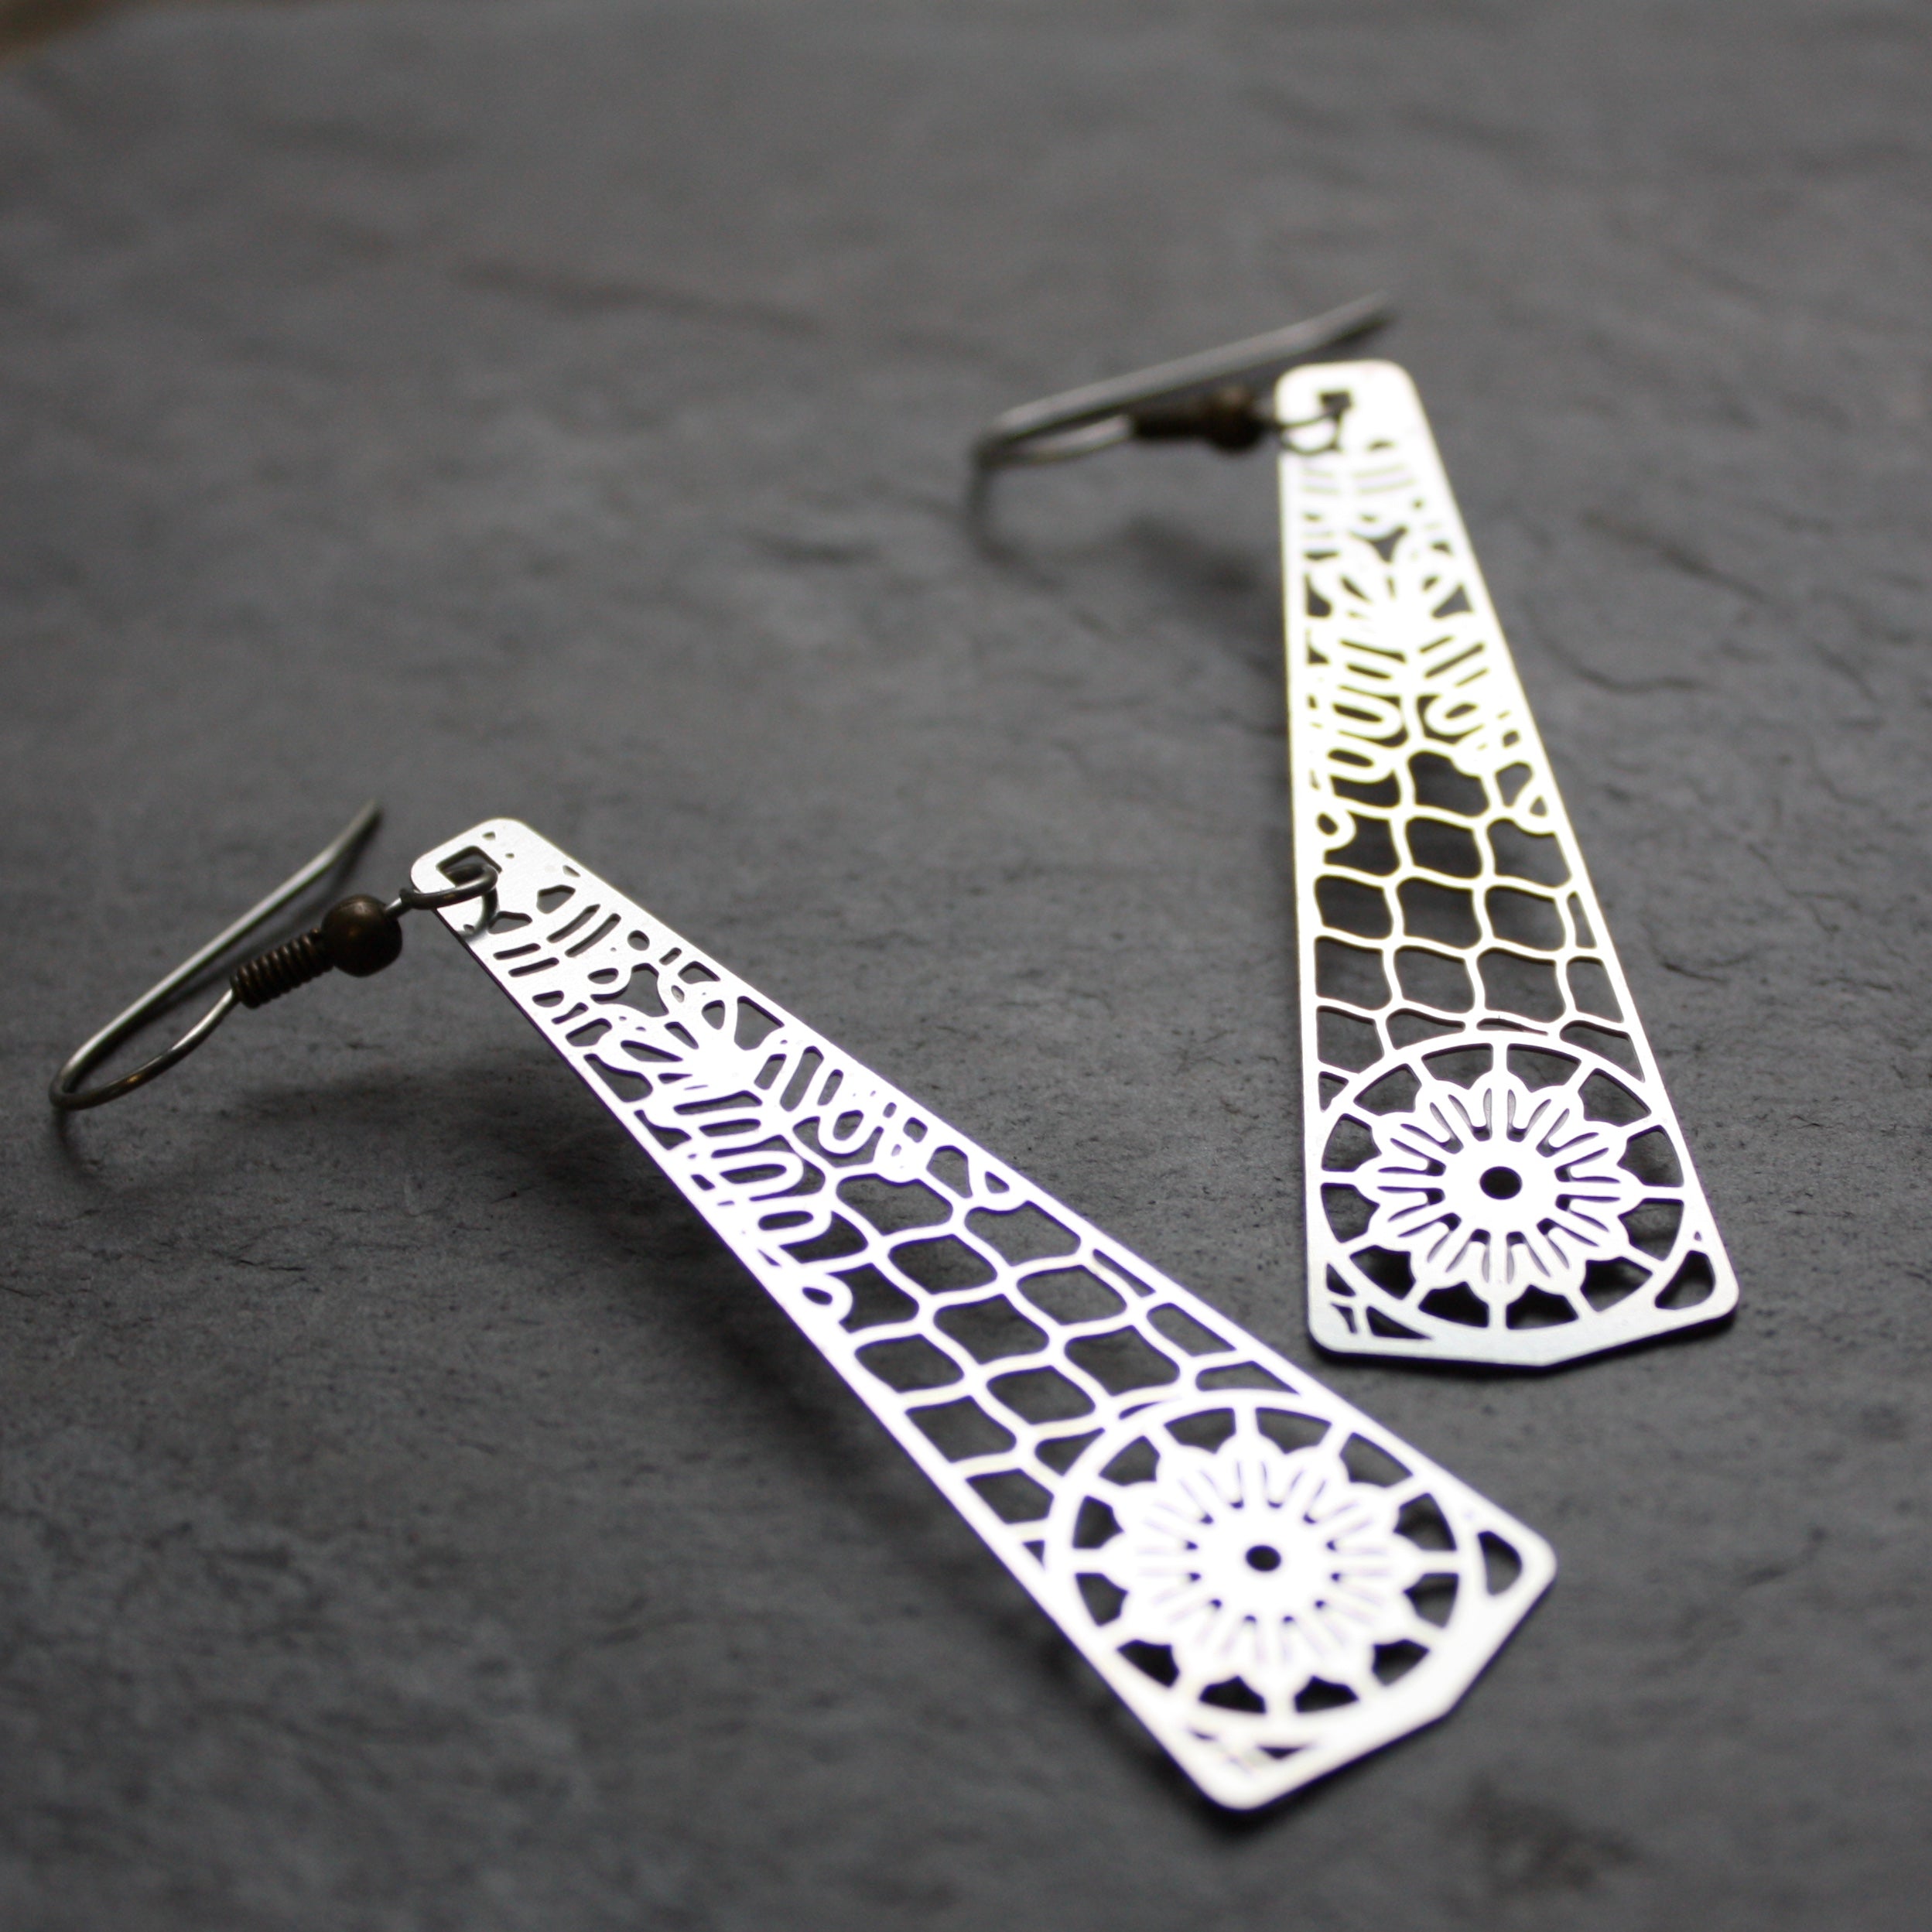 Stainless steel lace earrings by audra azoury